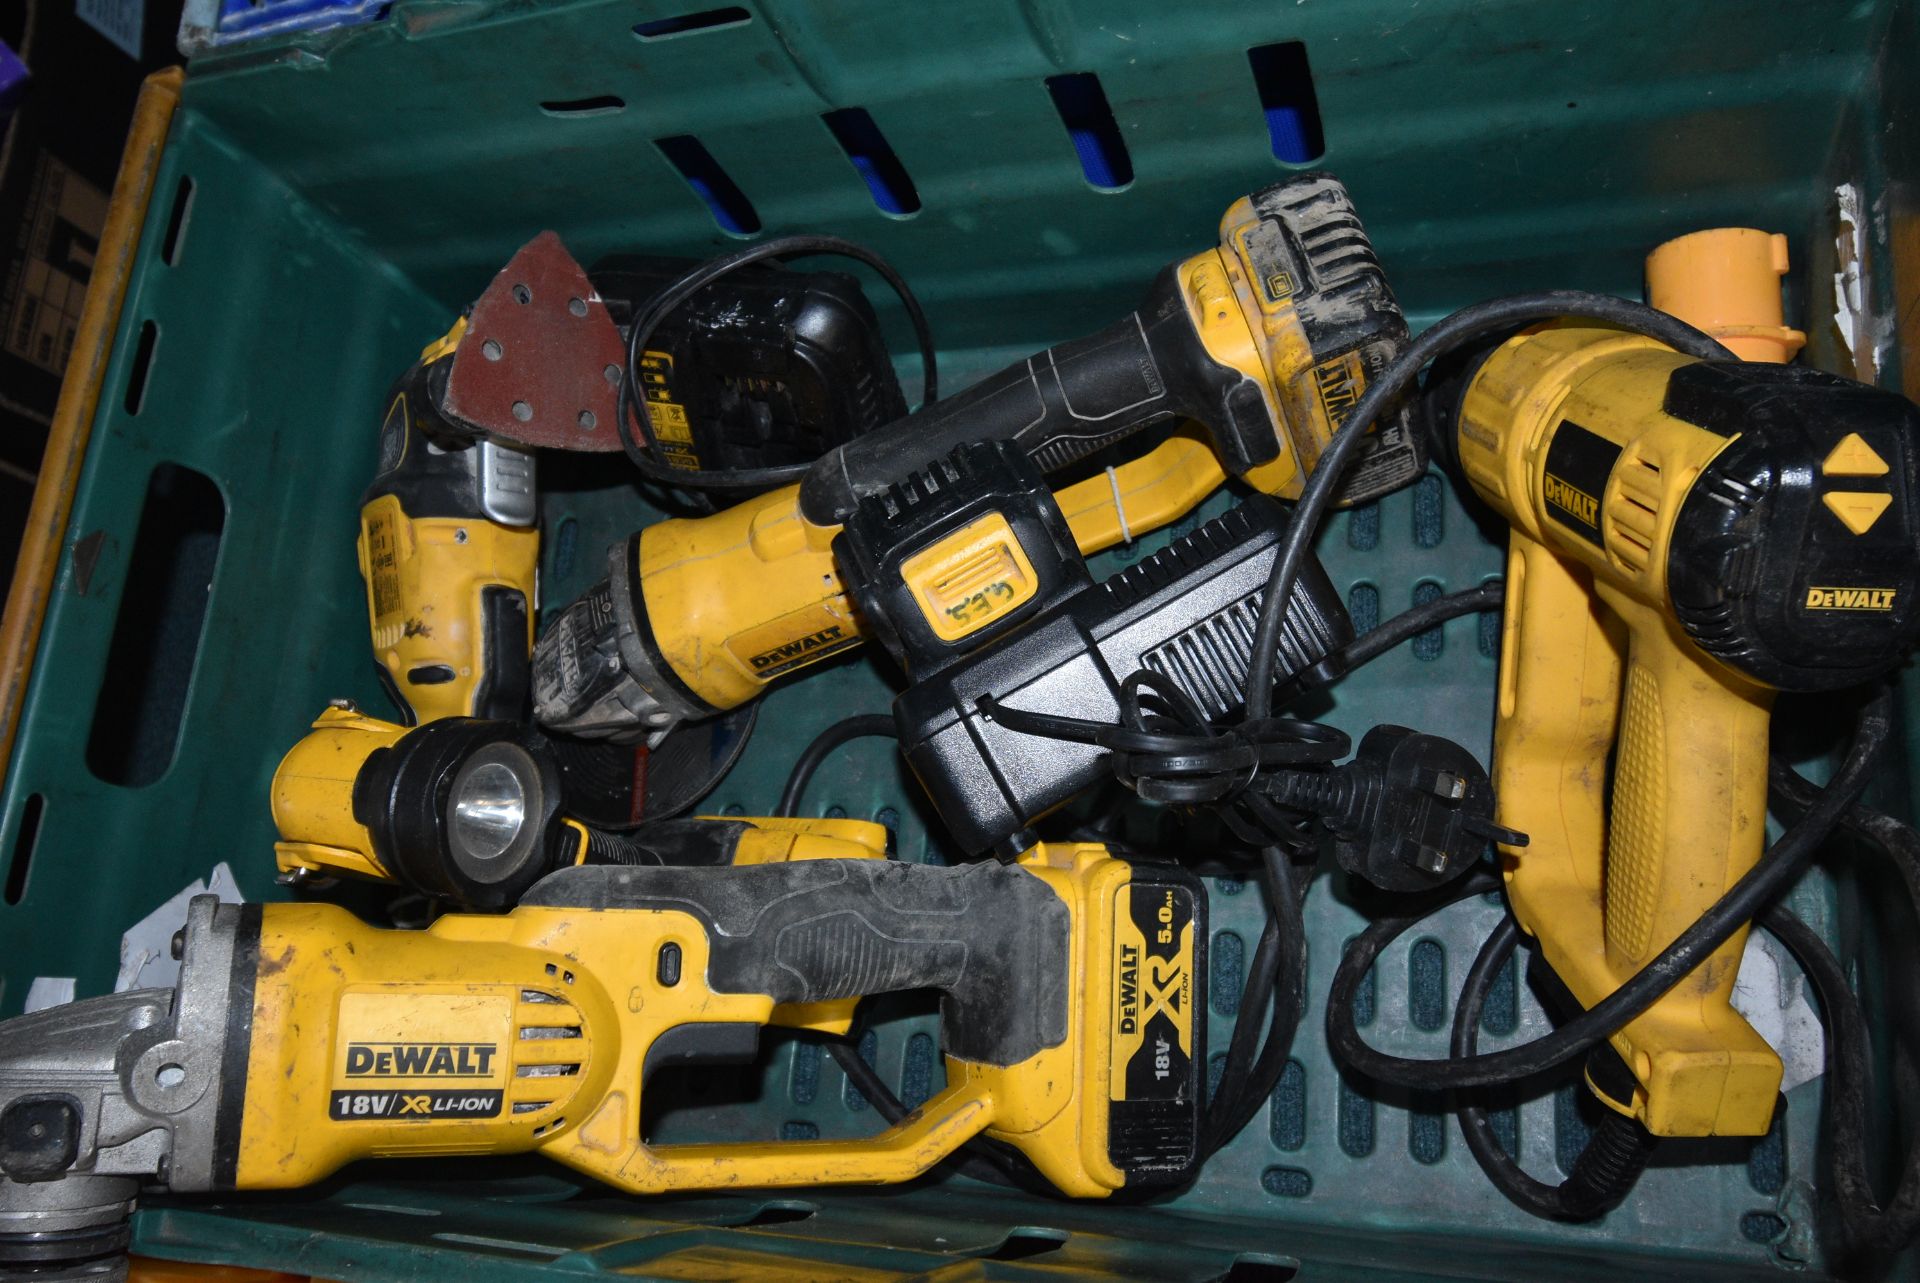 Dewalt Battery Operated Tools Including Angle Grinders, Torches, Sanders, and a 110v Heat Gun - Image 2 of 2